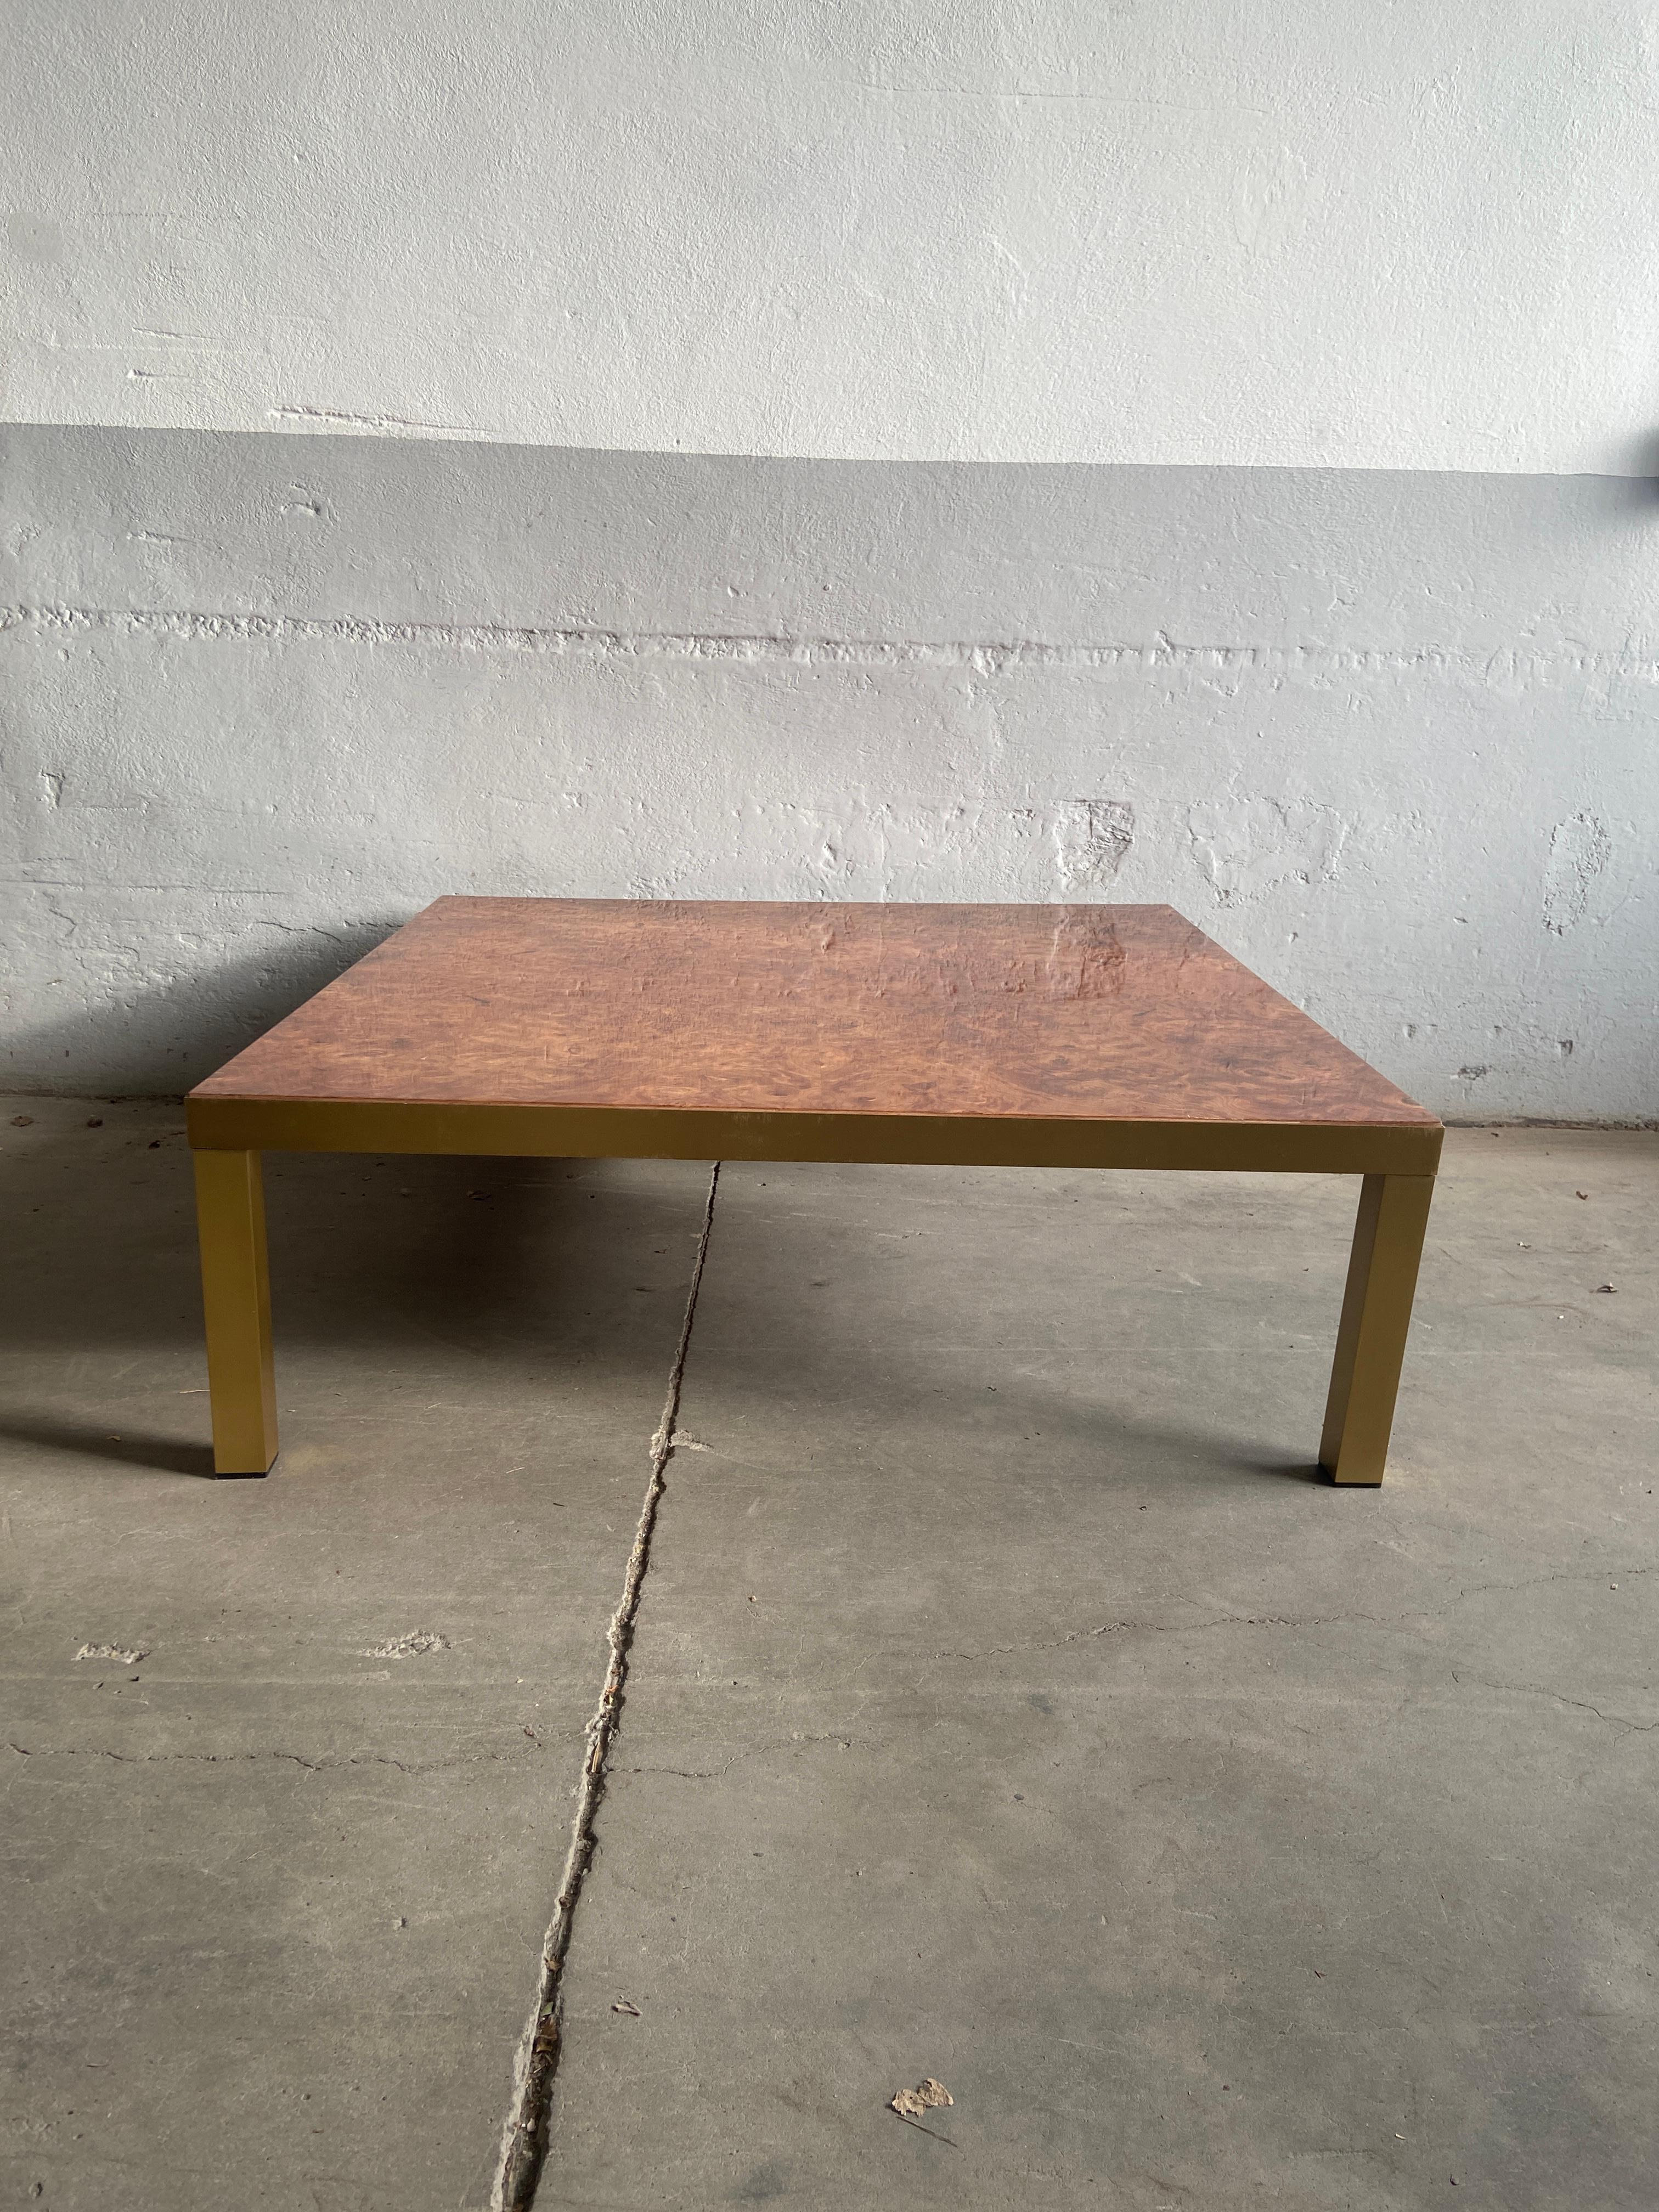 Mid-Century Modern Italian coffee or sofa table with brass lacquered metal base and shiny briar-root top.
The table measures cm. 120 x 120 x H 40 and it can become a set together with another smaller but identical coffee table (cm.90 x 90 x H 40